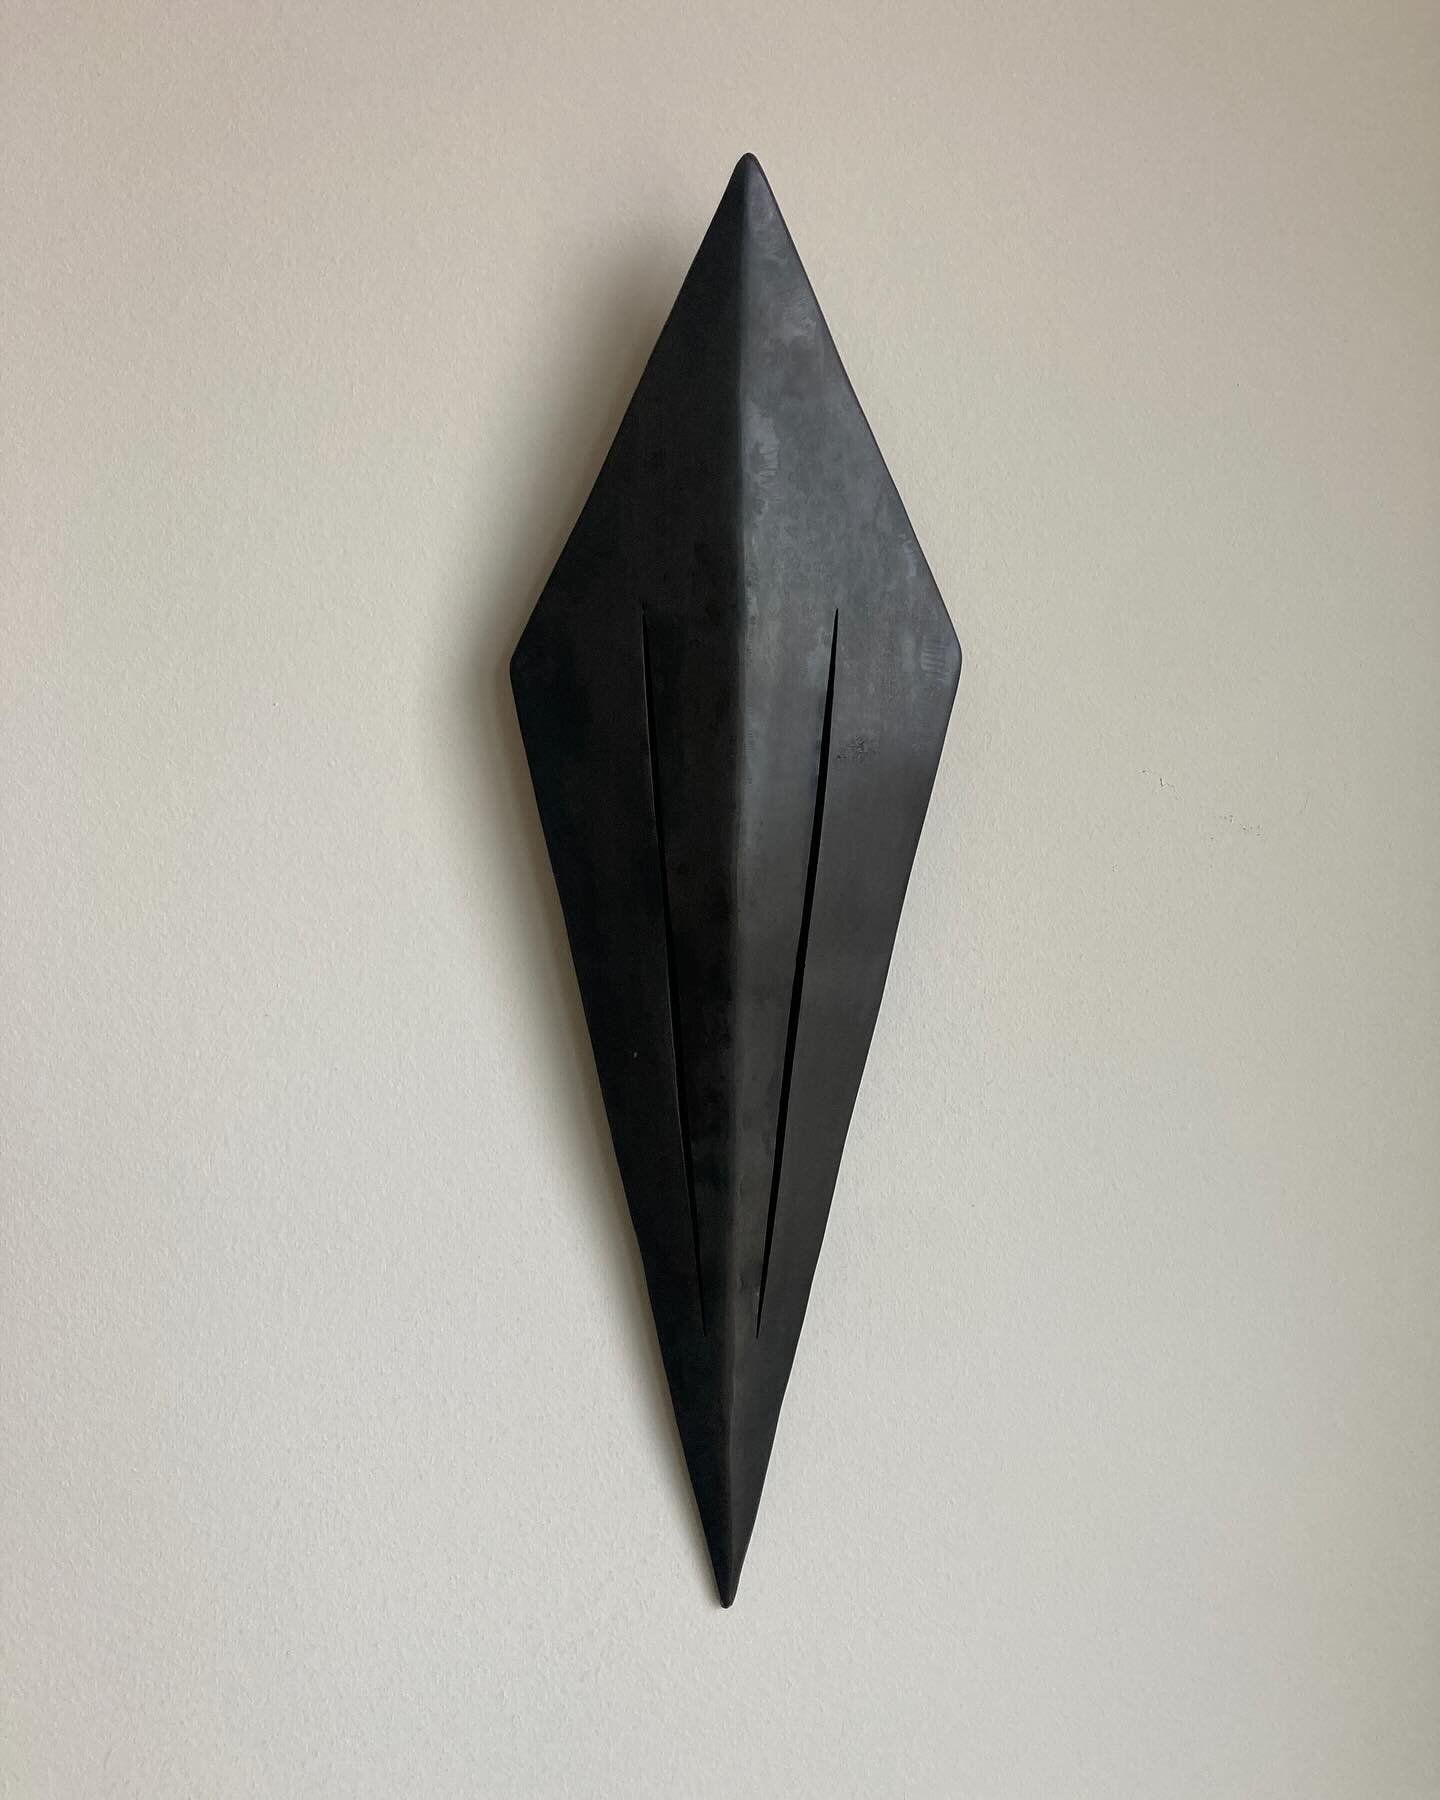 This is an untitled piece from 2011 (?) that hangs on the wall in my apartment. I used to make lots hollow forms from welded sheet metal and I&rsquo;ve been thinking about it a lot lately. This wall mounted piece measures about 16&rdquo; tall. I made